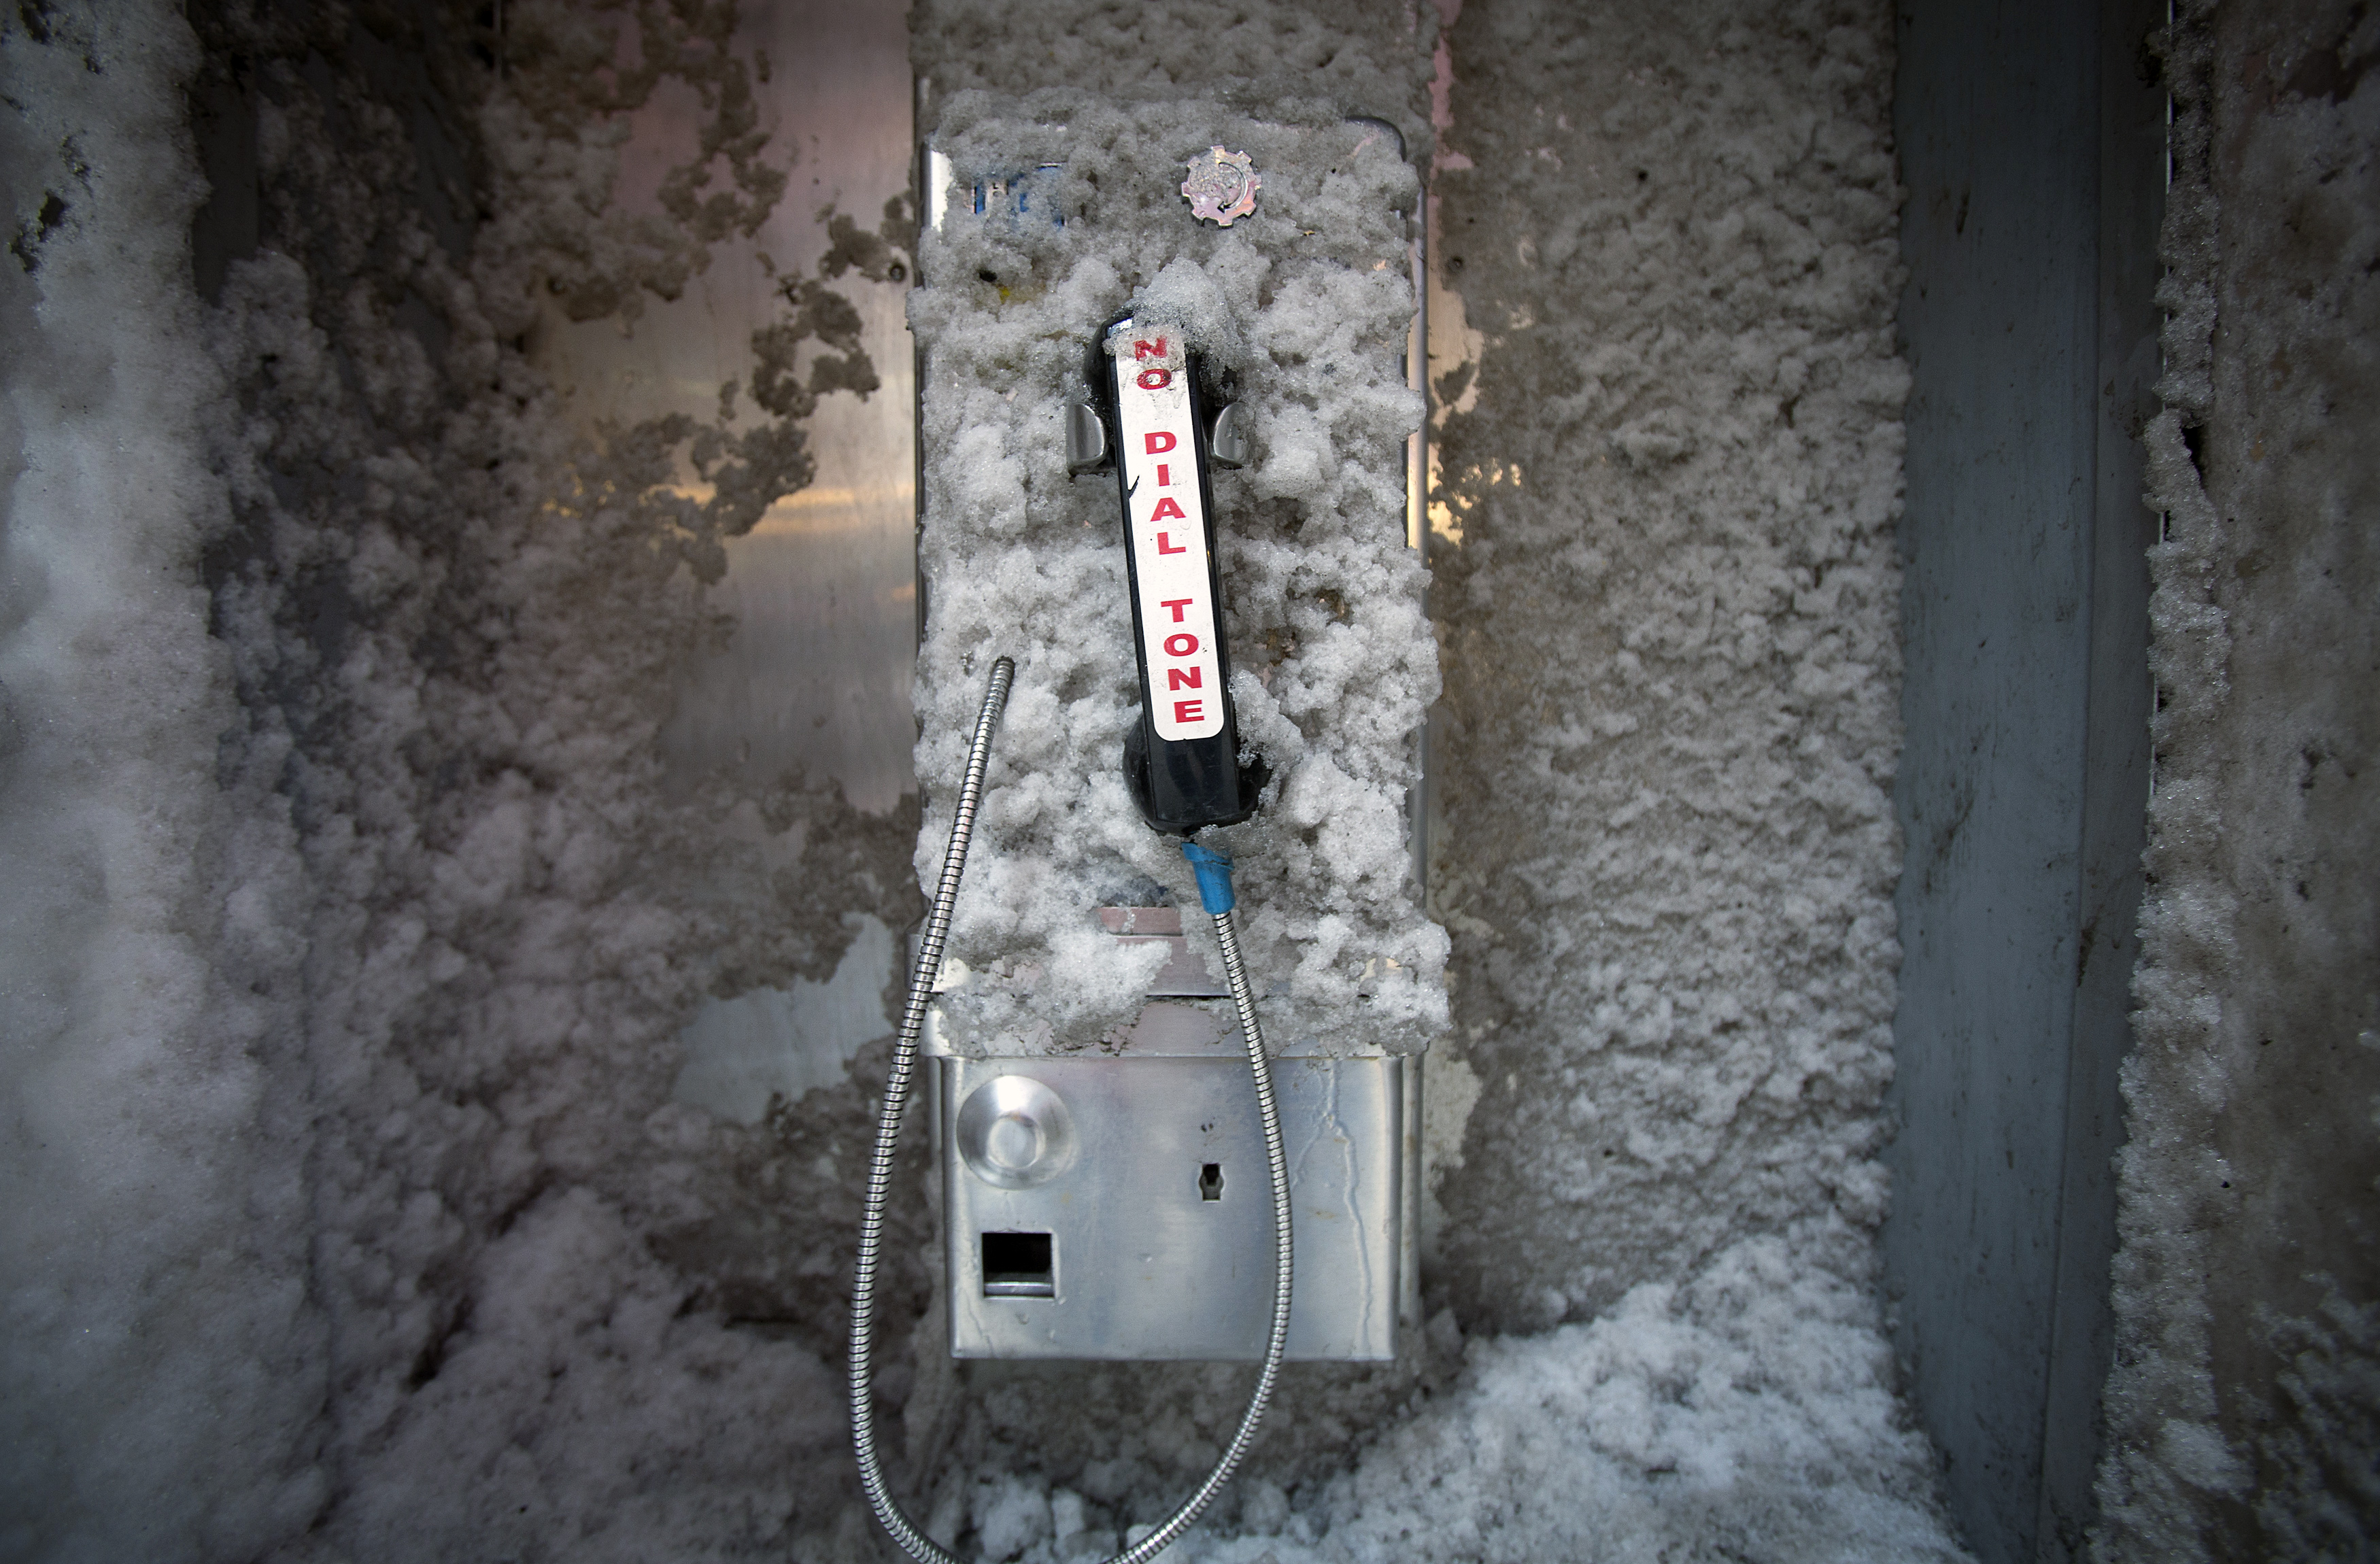 A disused pay phone is covered in snow in Times Square in New York